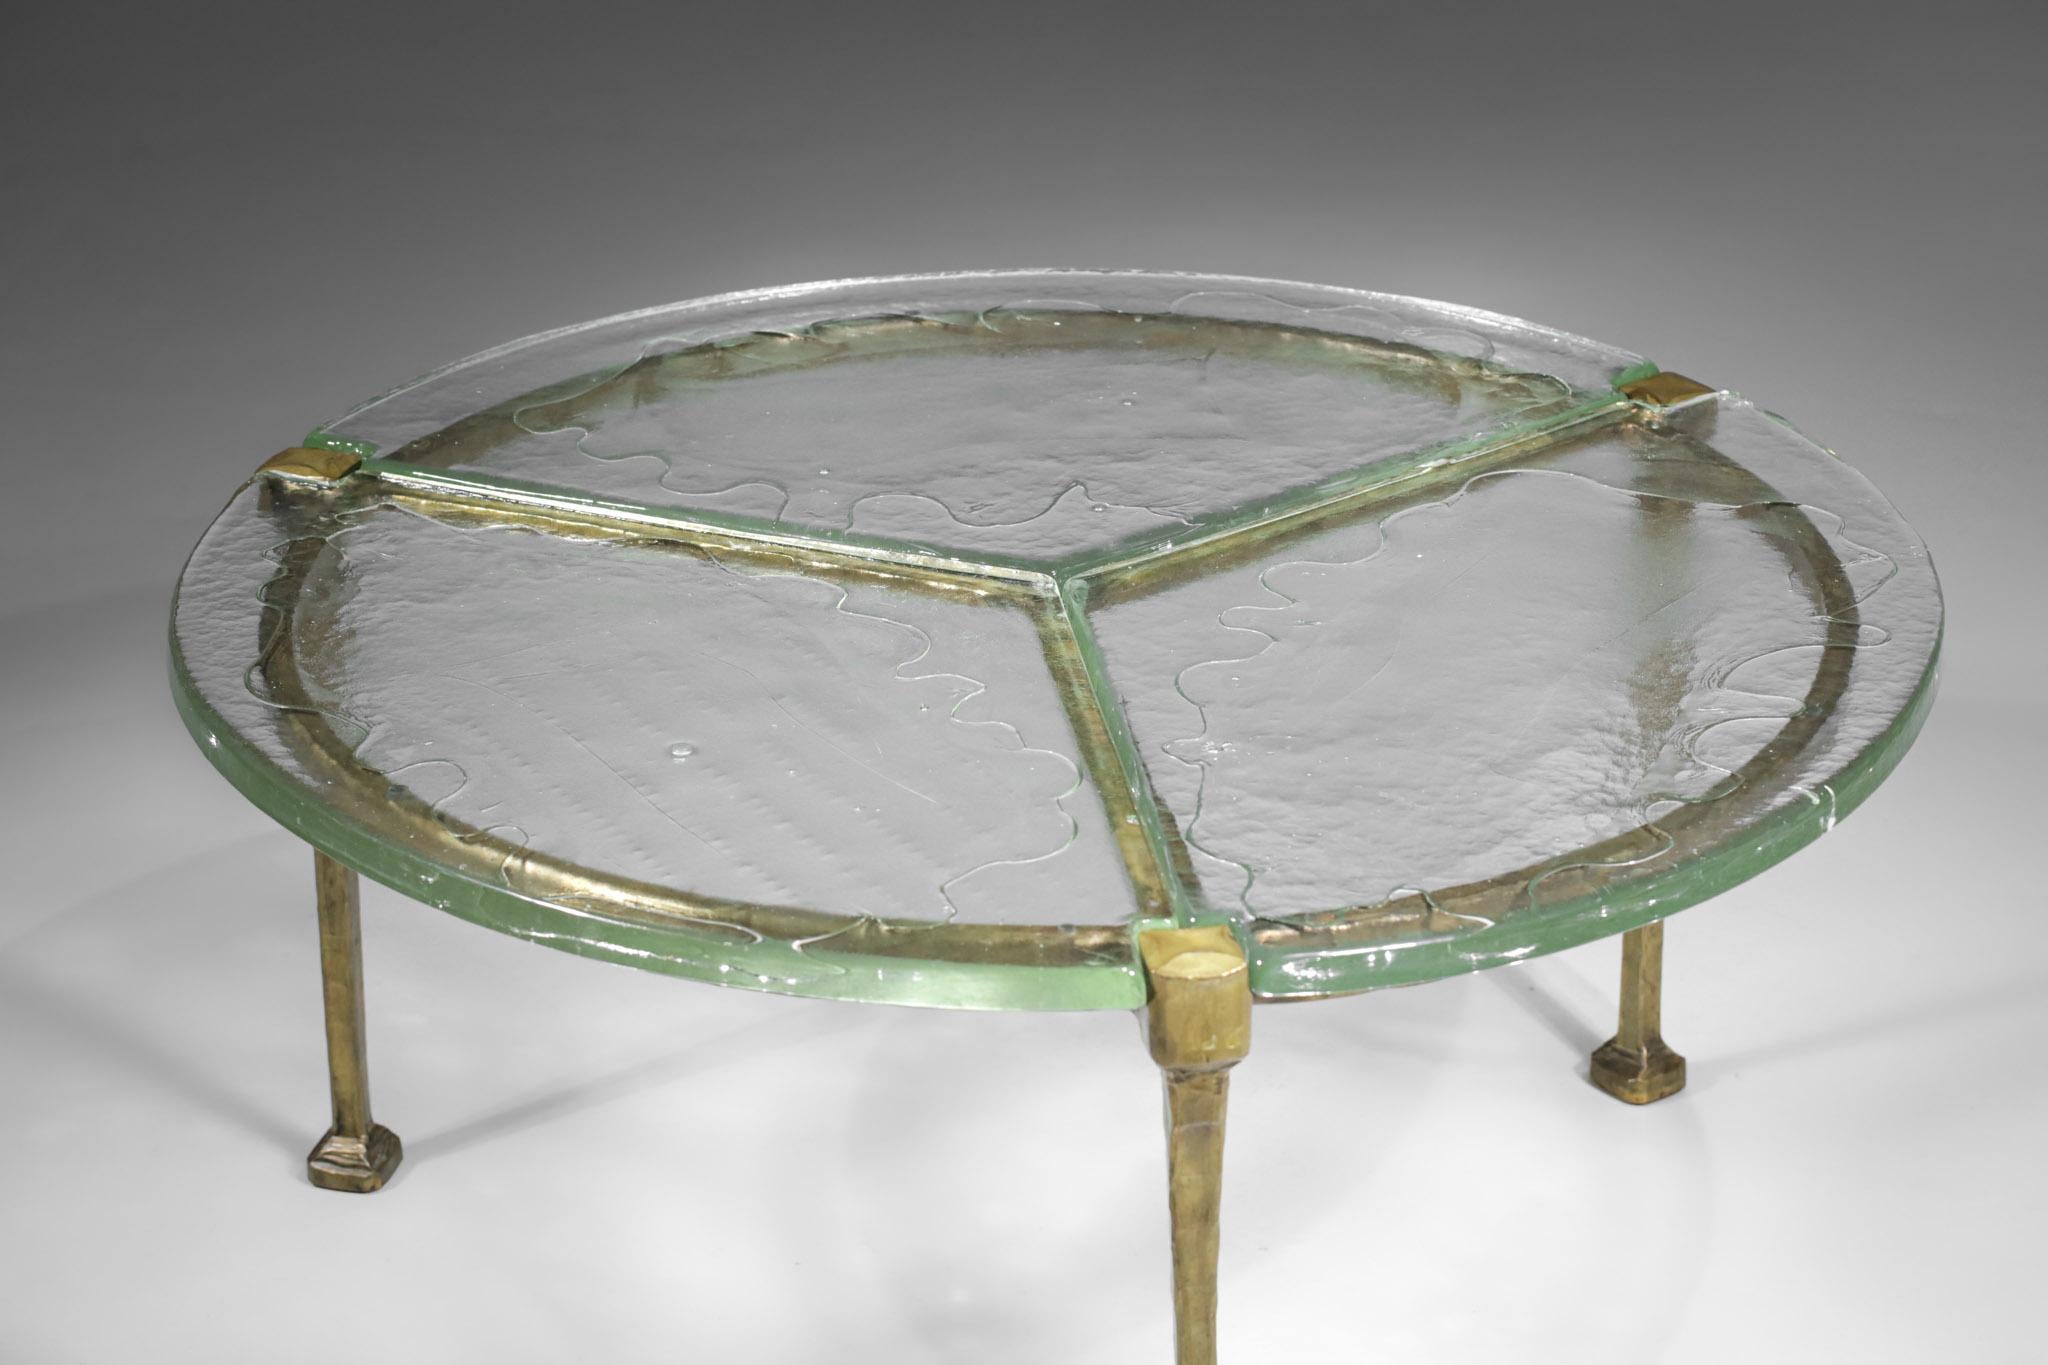 Tripod bronze coffee table by the German artist Lothar Klute. Solid bronze structure and top made of three thick glasses (2,5 cm). Excellent vintage condition, note a small chip on one of the edges (see photos).